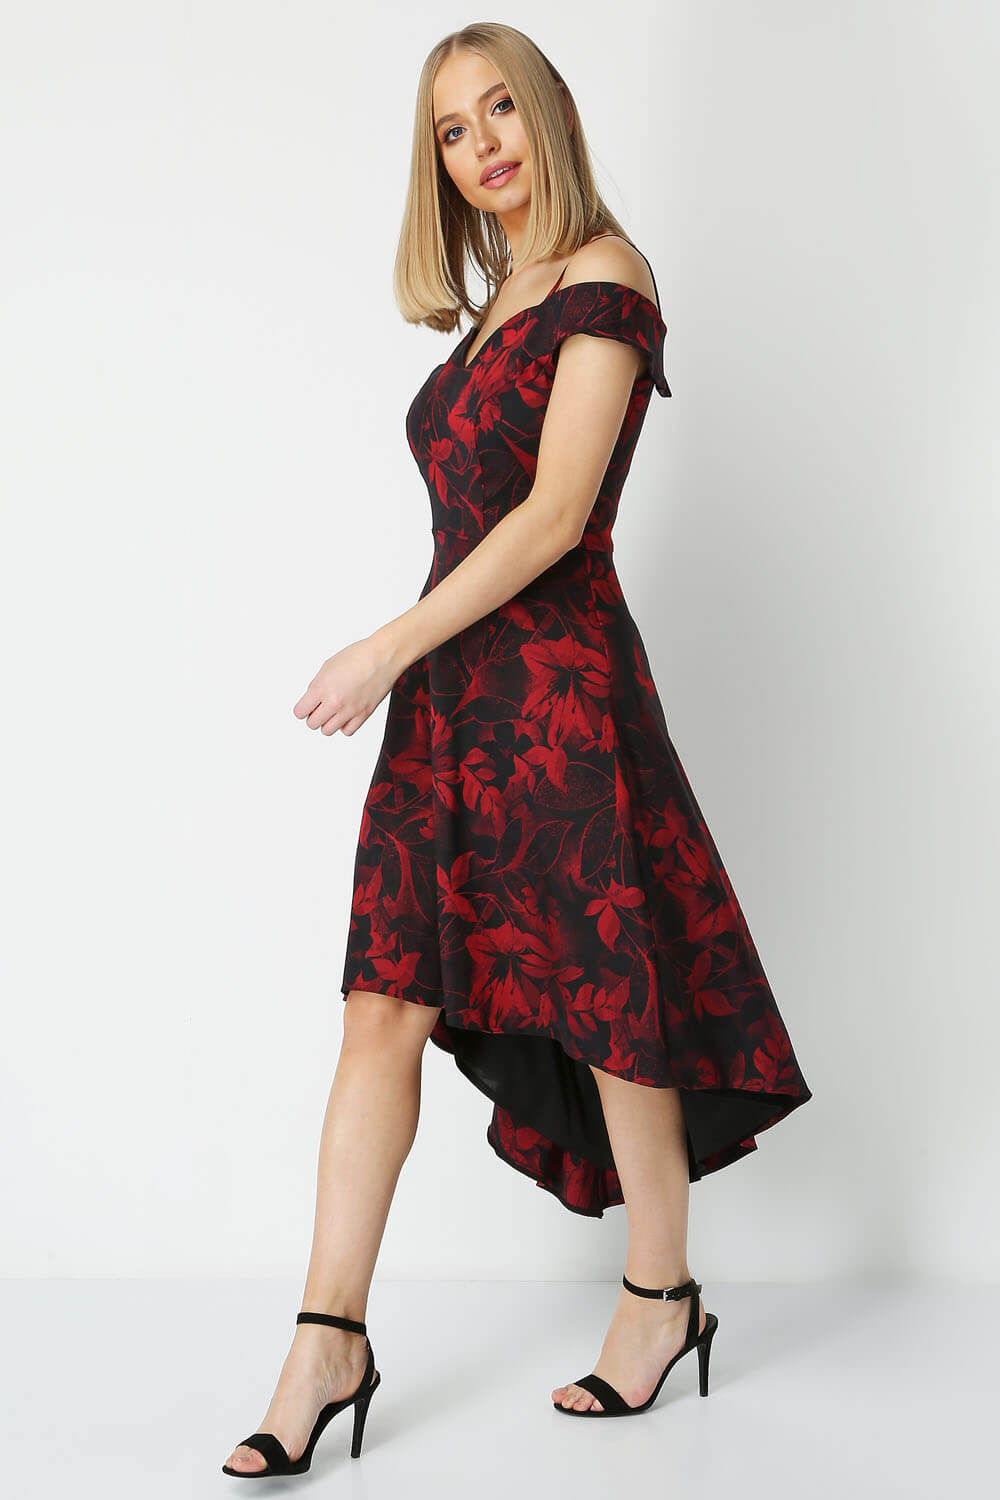 Black Floral Fit and Flare Dress, Image 2 of 4